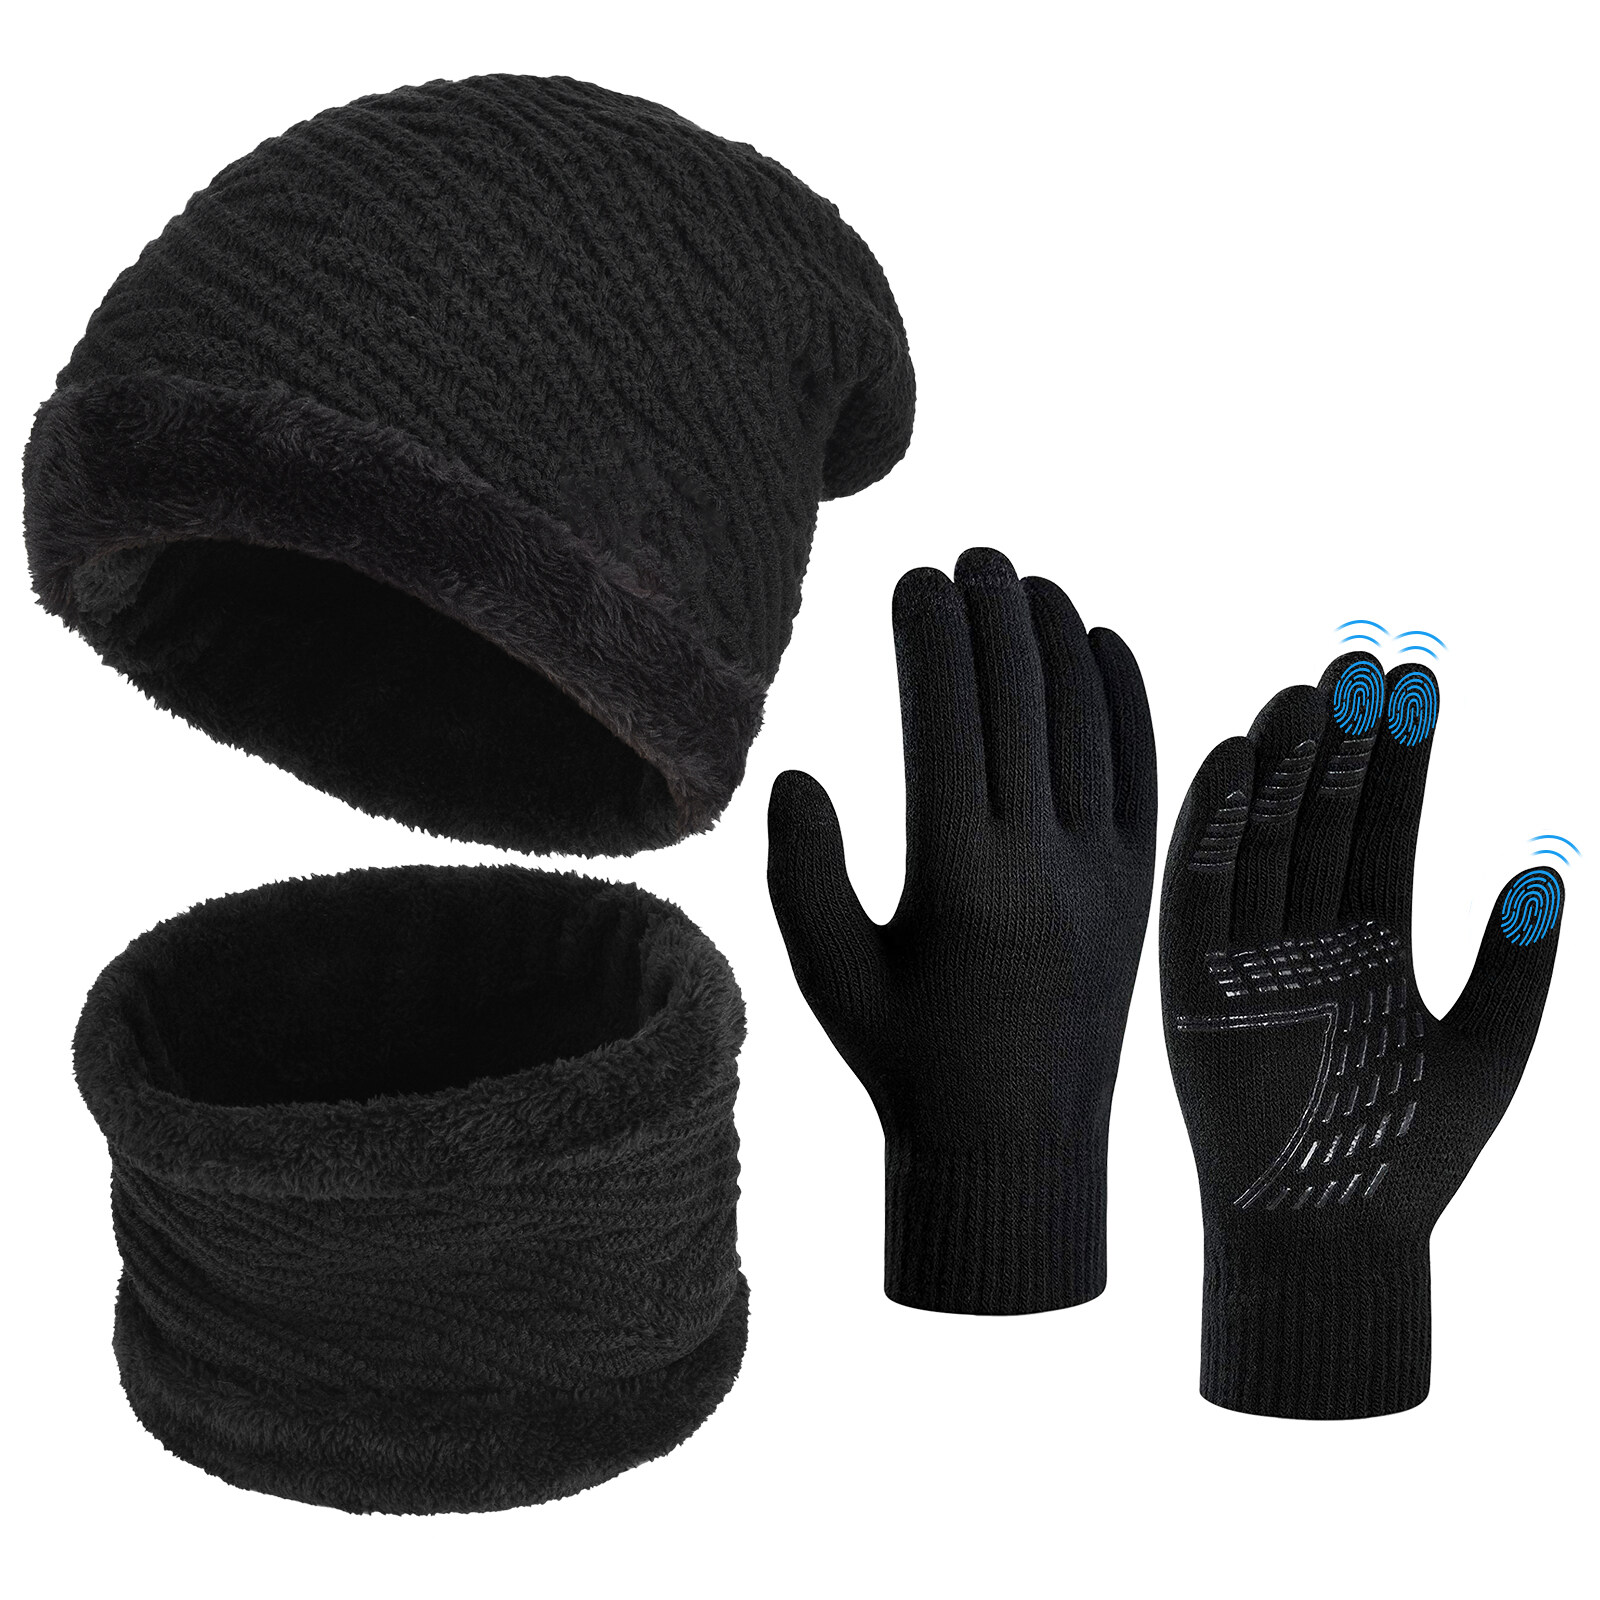 Vbiger Winter Beanie Hat Scarf Set - Knit Wool Neck Warmer Skull Cap with Touch Screen Cold Weather Gloves 3 PCS Soft Fleece for Men Black - image 1 of 6